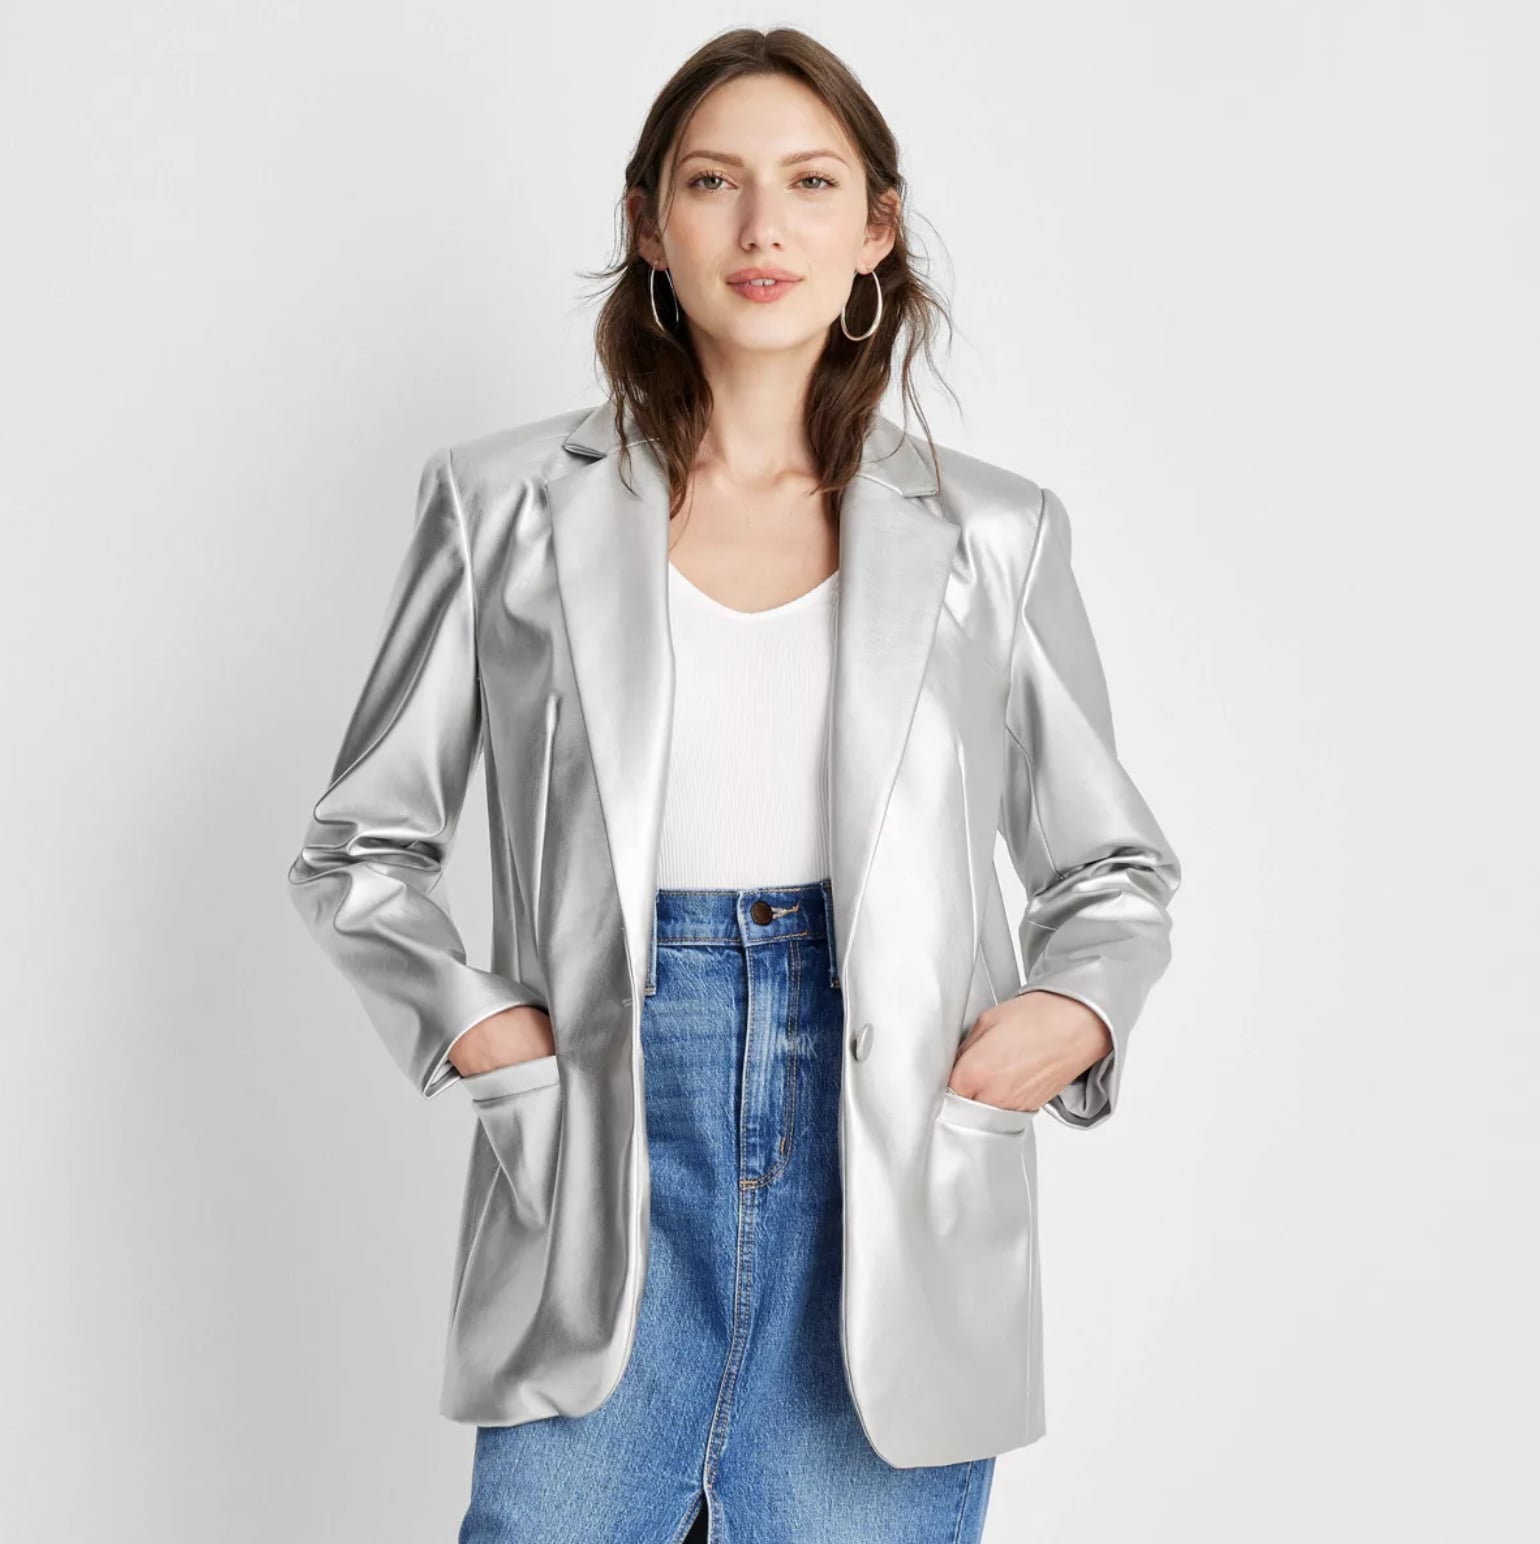 Silver for Spring Is Trending: Here's 20 Metallic Pieces to Shop Right Now